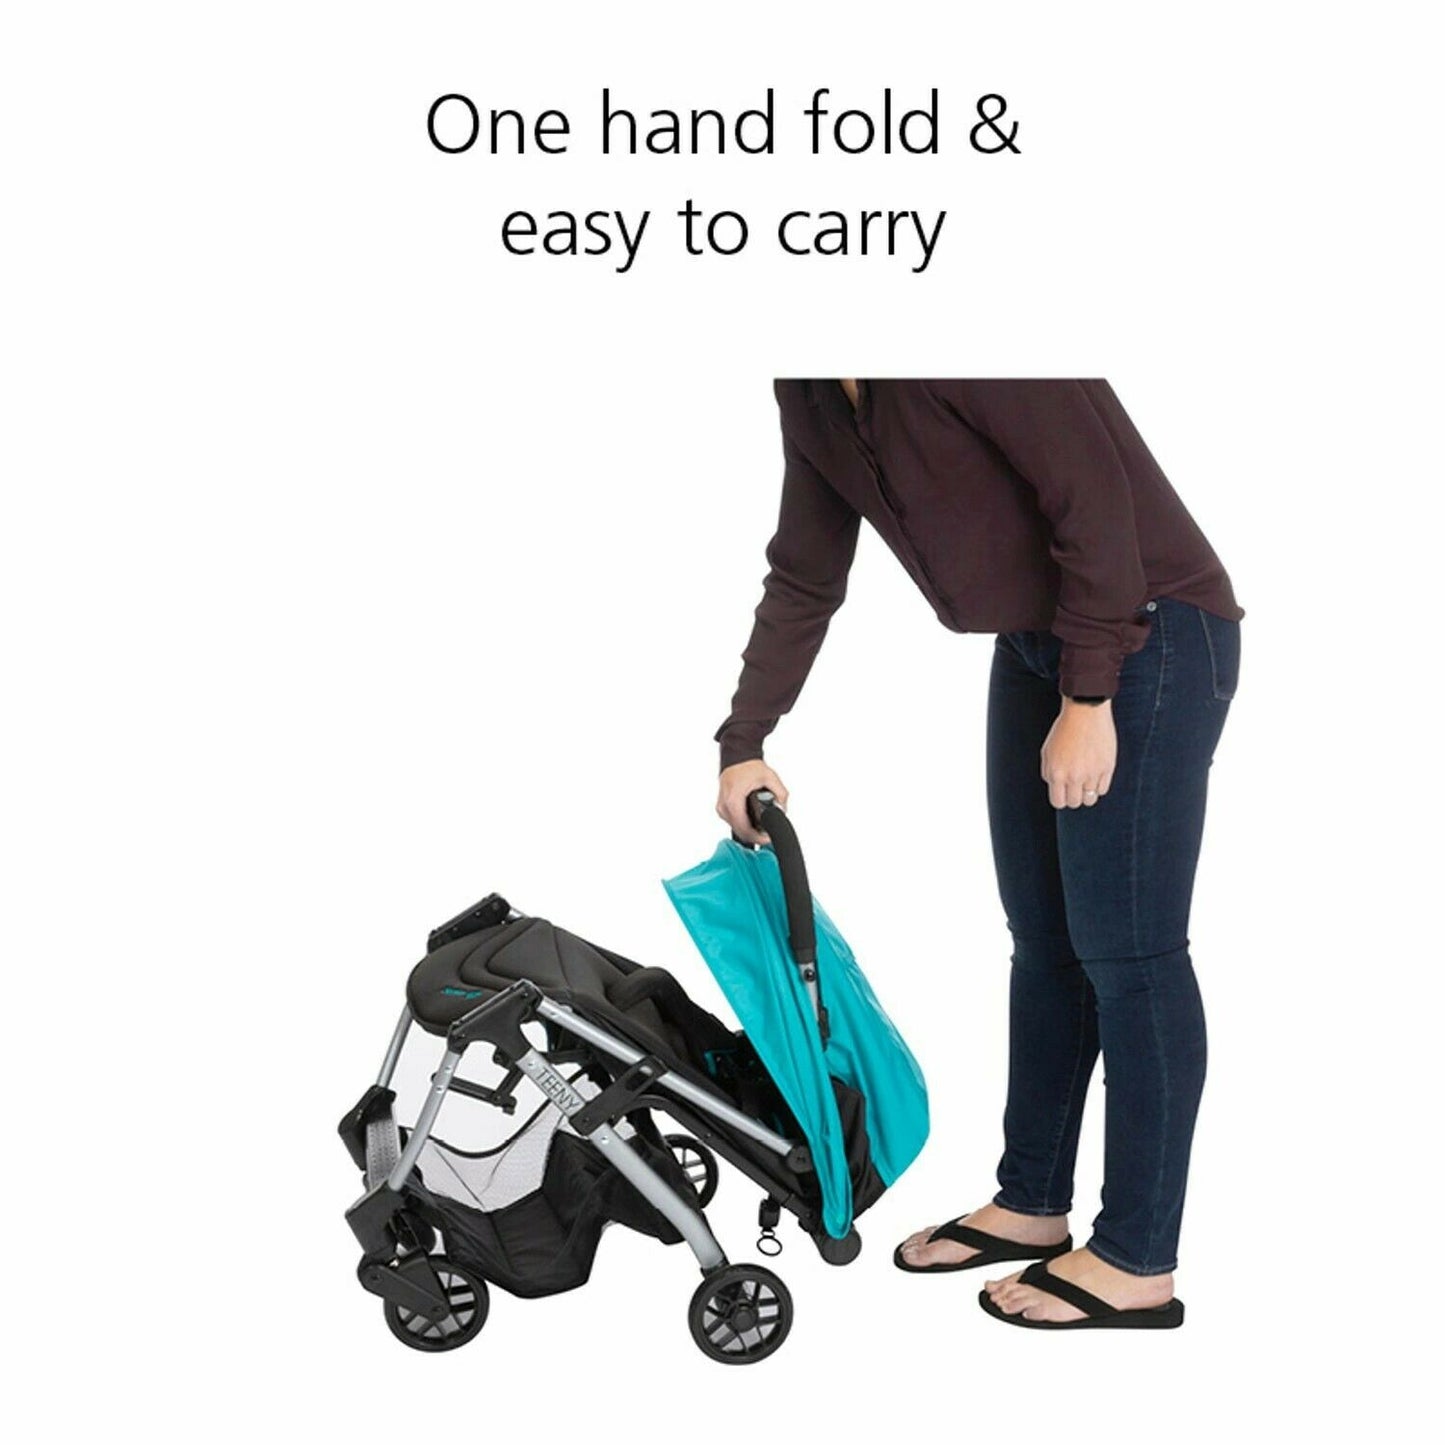 Safety 1st Ultra Compact Baby Stroller Lightweight One Hand Fold Travel - Blue